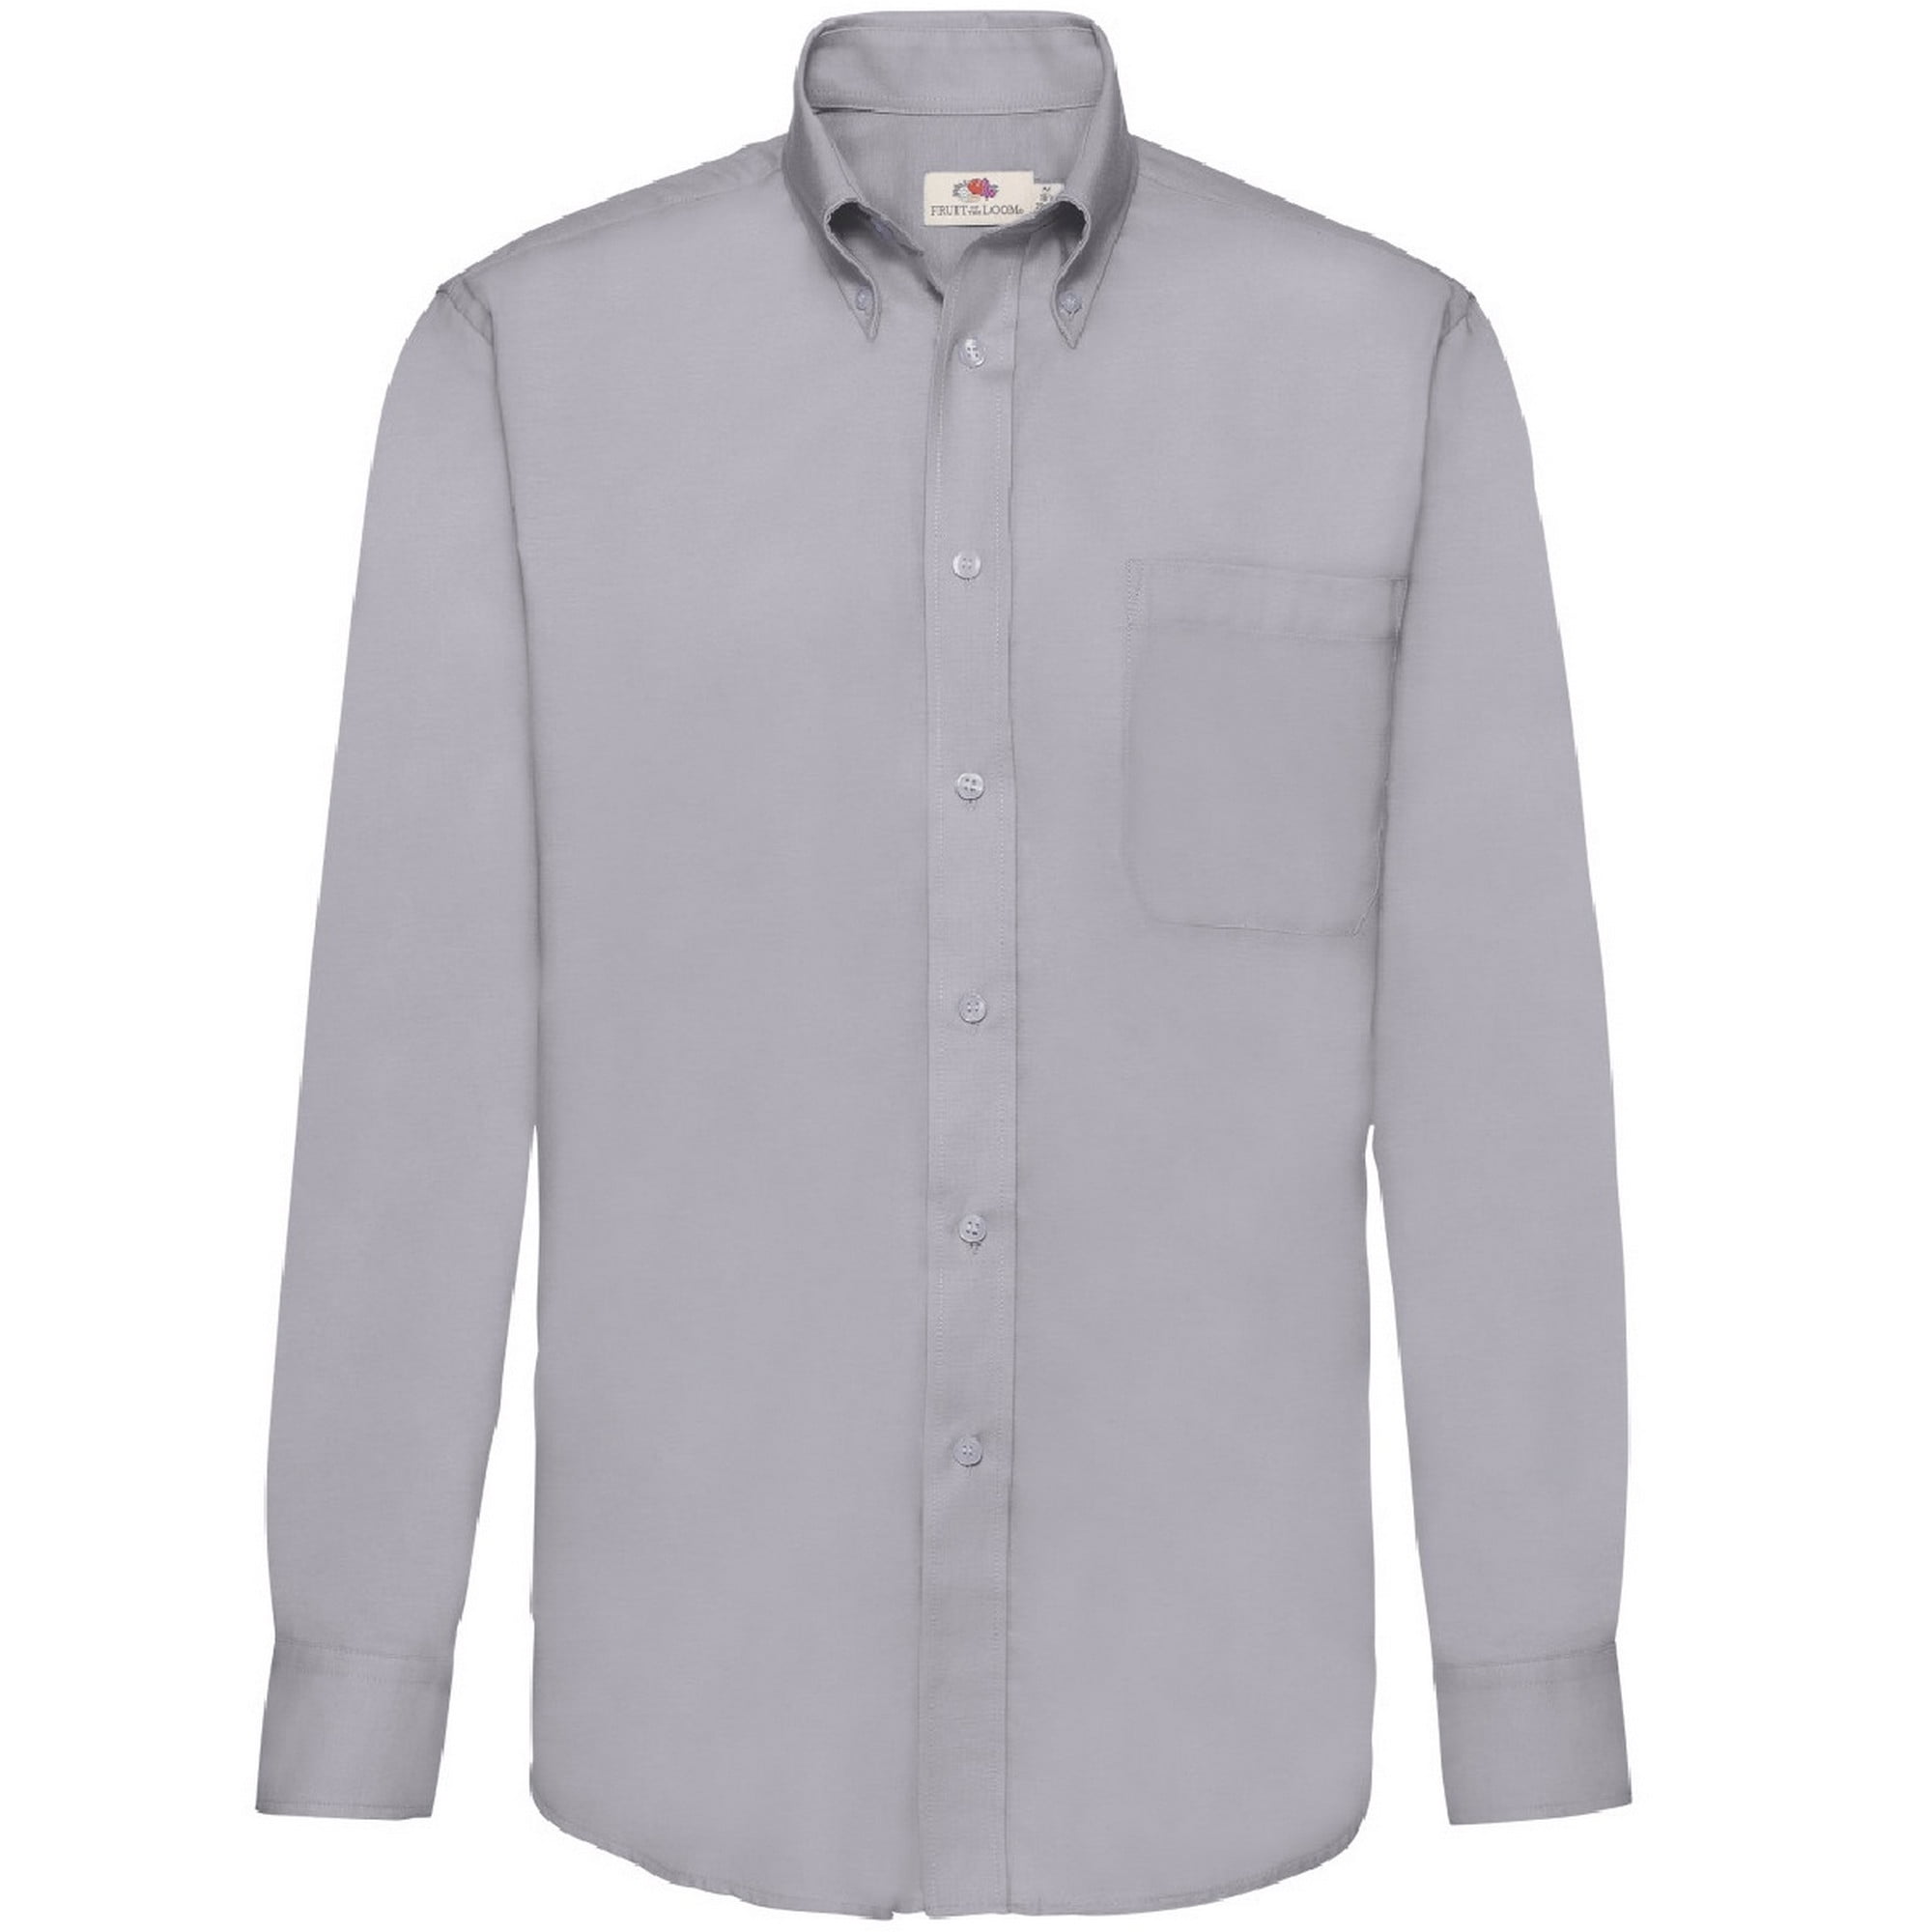 Fruit of the Loom Oxford Long Sleeve Shirt 